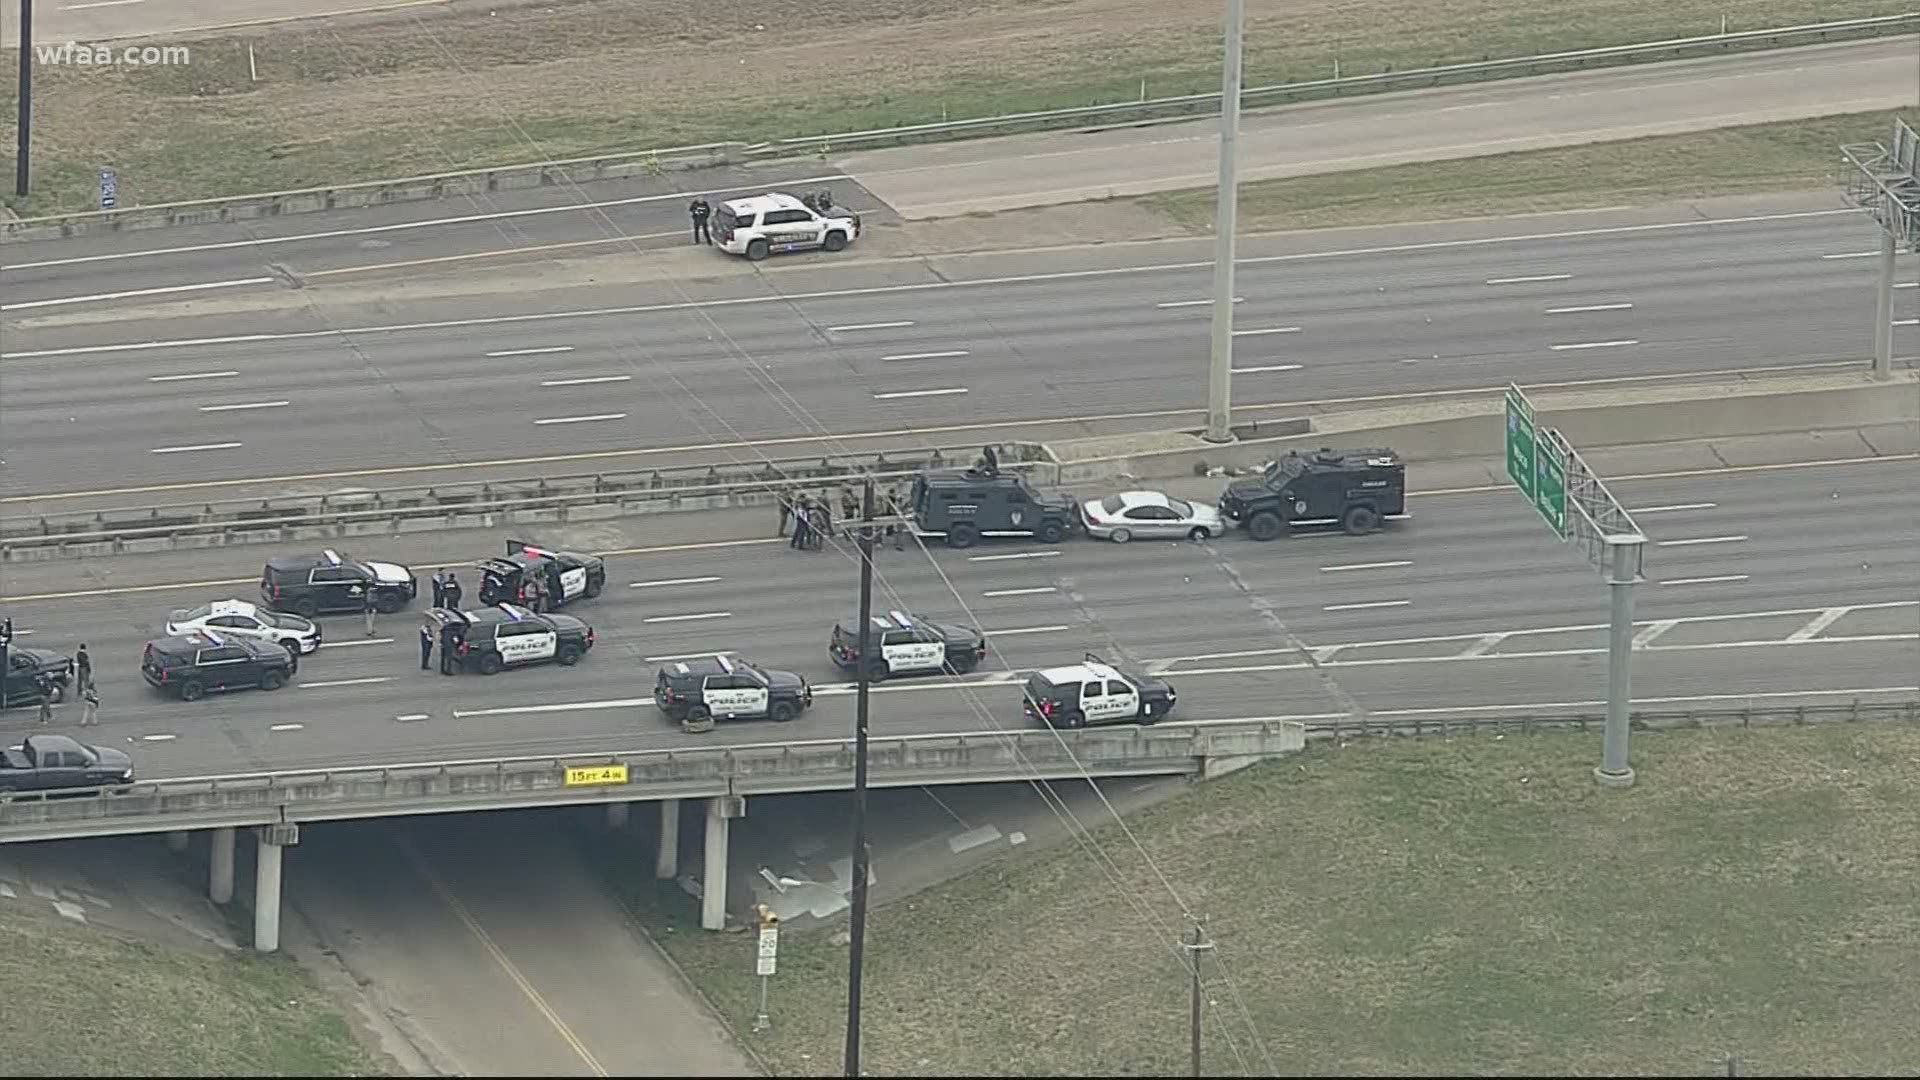 Authorities closed Interstate 20 in both directions at Polk Street due to a SWAT incident Friday morning.